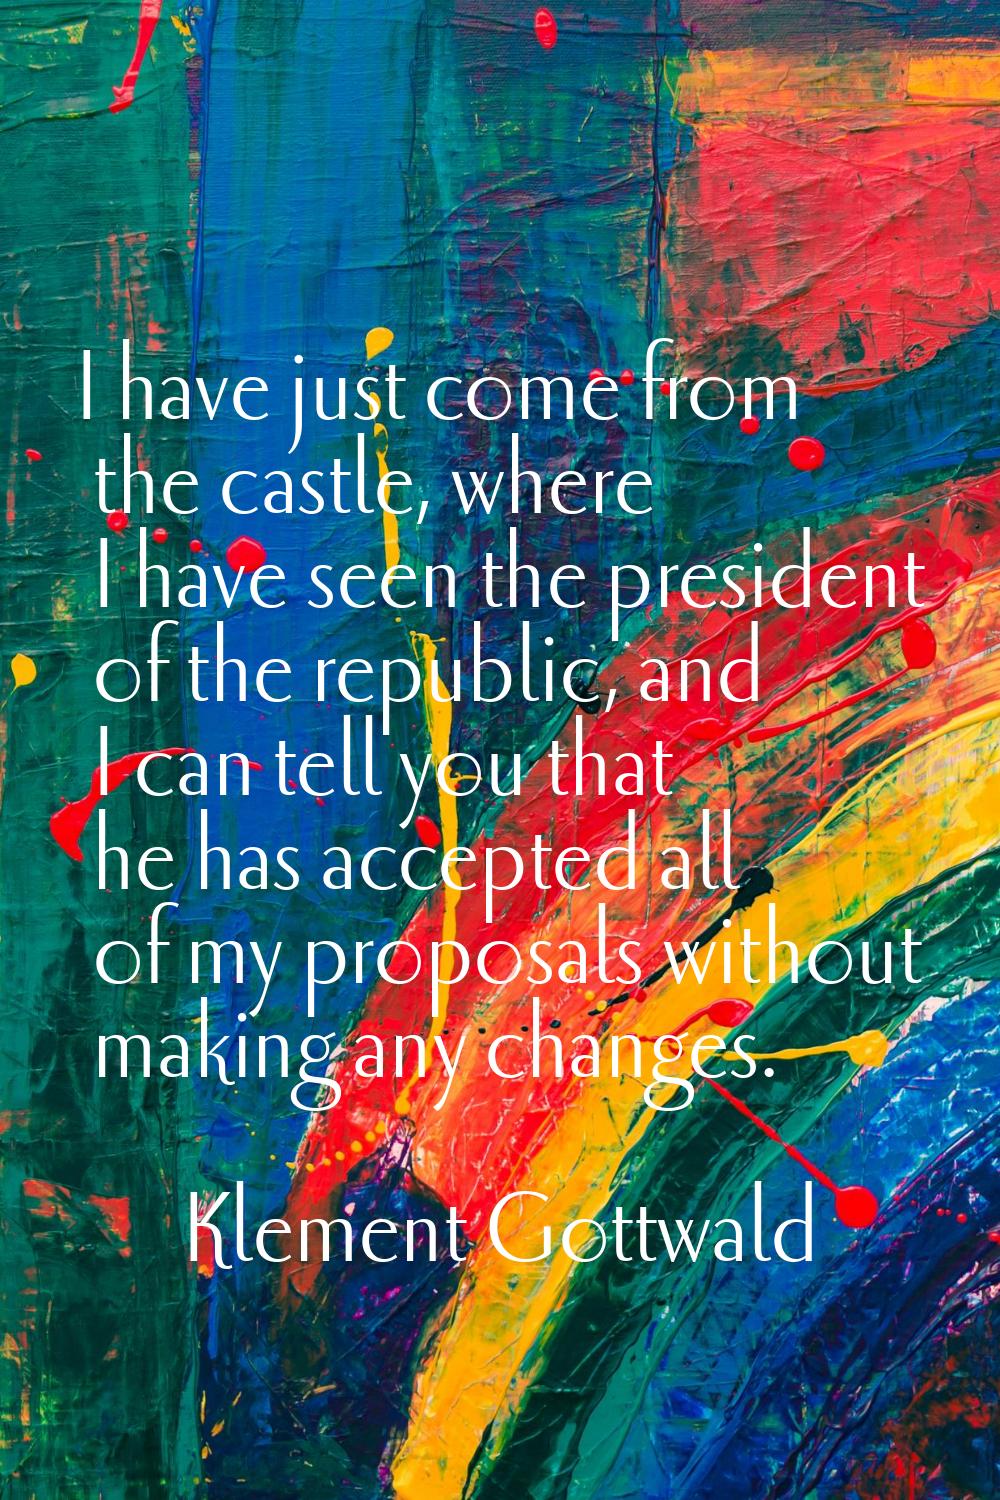 I have just come from the castle, where I have seen the president of the republic, and I can tell y